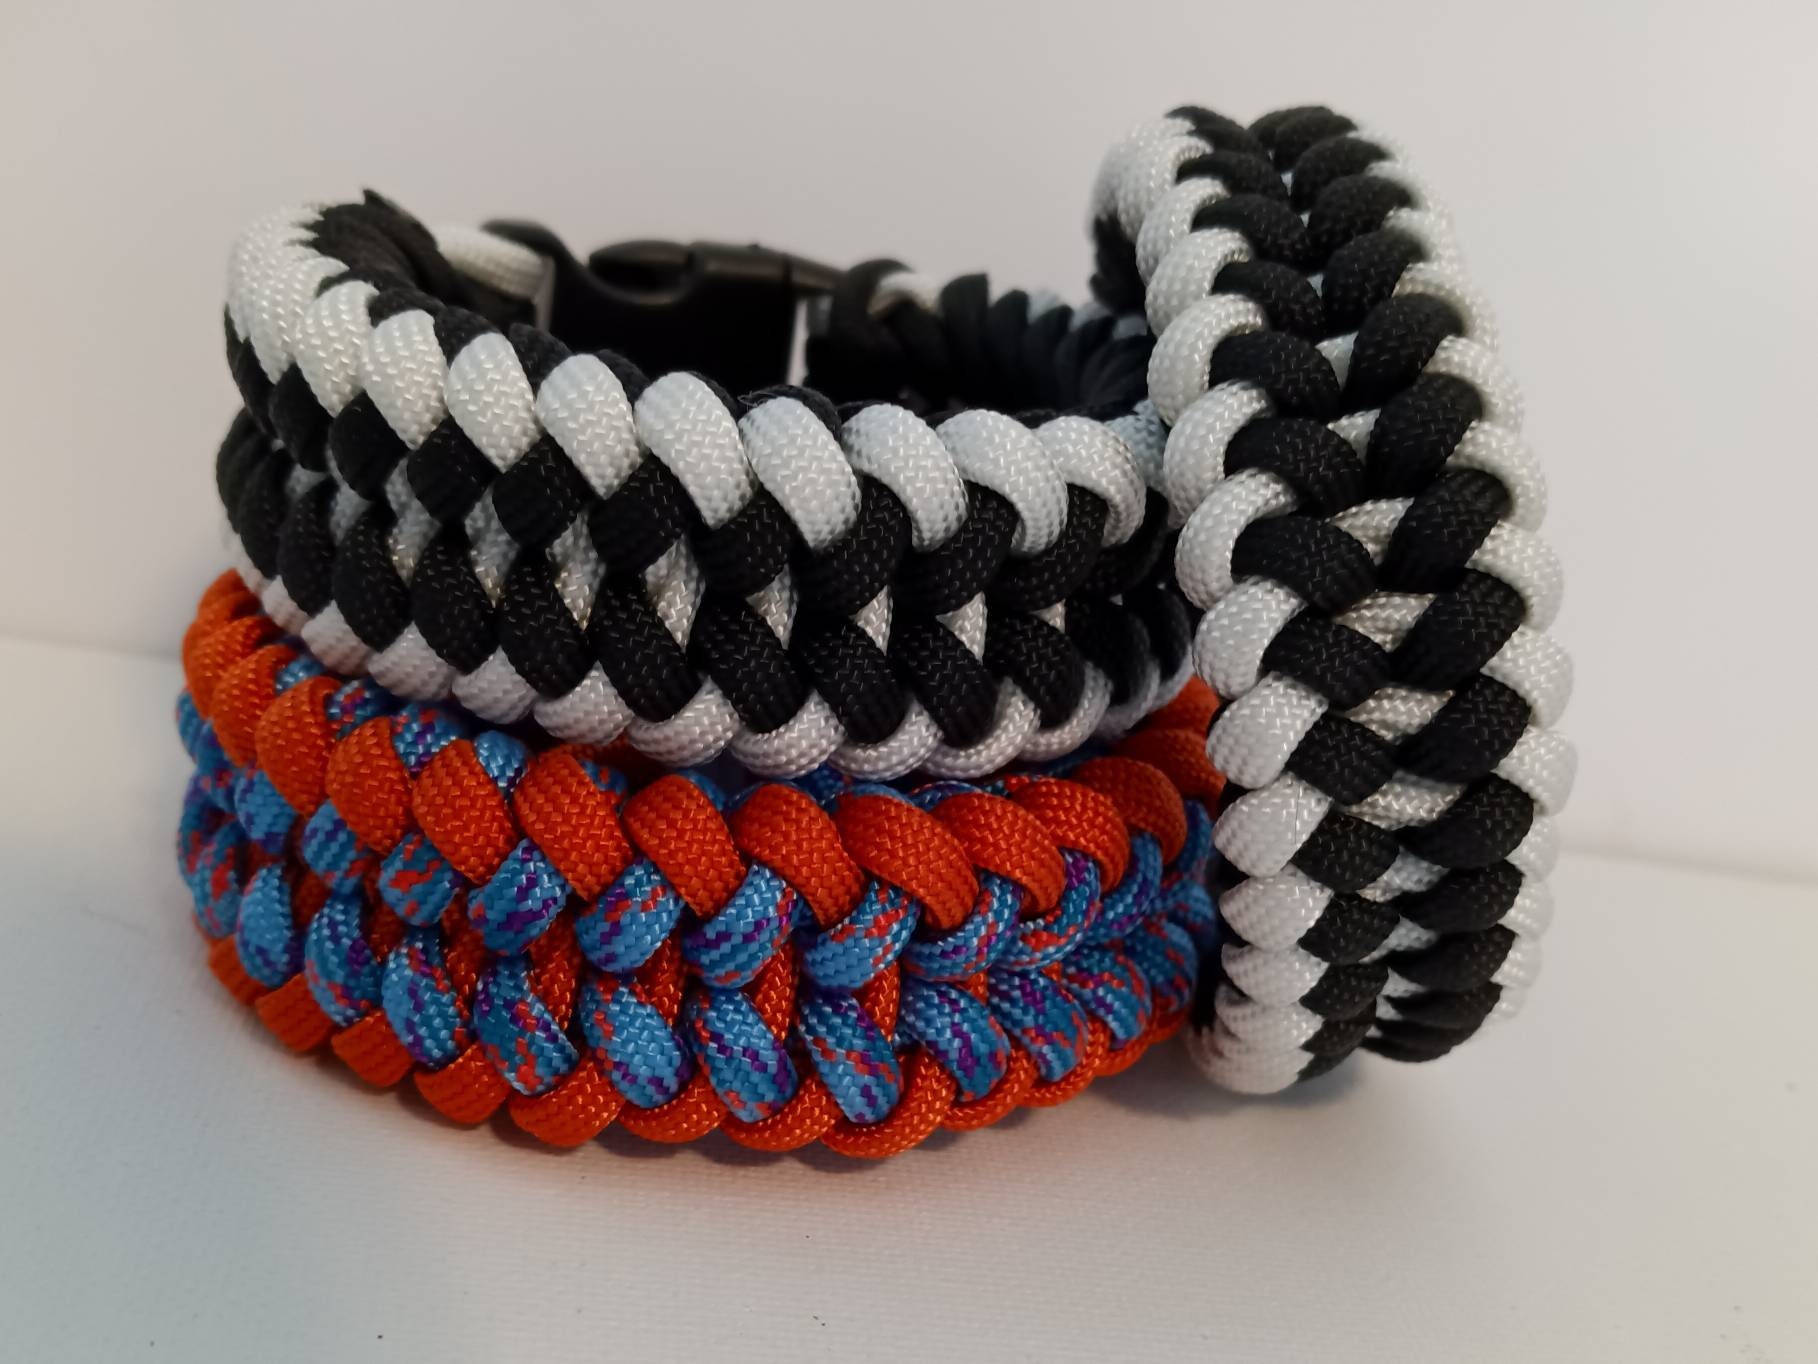 New Colors! Over 80 Colors to Choose From. Sanctified Paracord Bracelet, 2  or 4 Internal Strands, Thousands of Color Combinations!